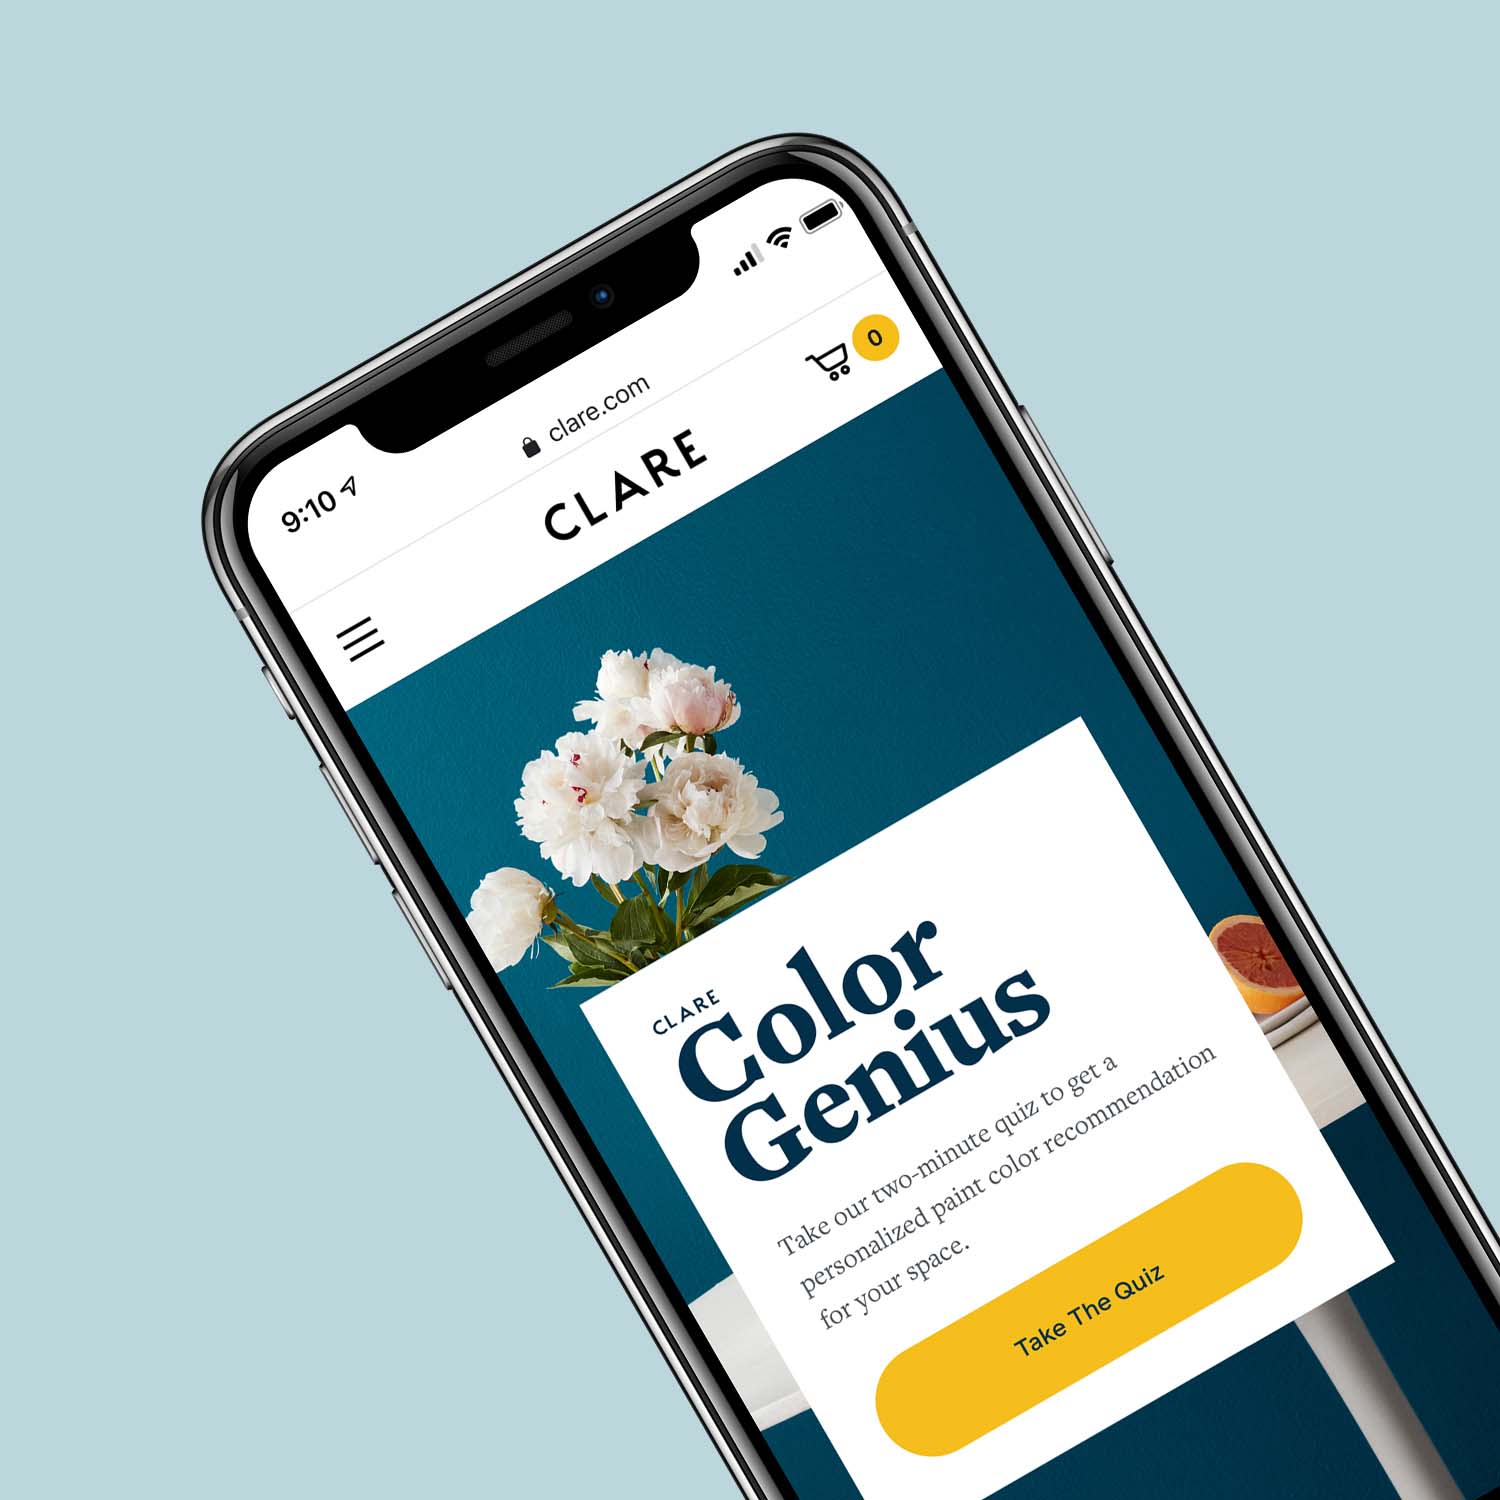 To help you choose a paint color online, we created Clare Color Genius to guide you. Just answer a few easy questions, and you’ll get a personalized color recommendation for your space...it’s like having an interior designer to help you choose the perfect color! 